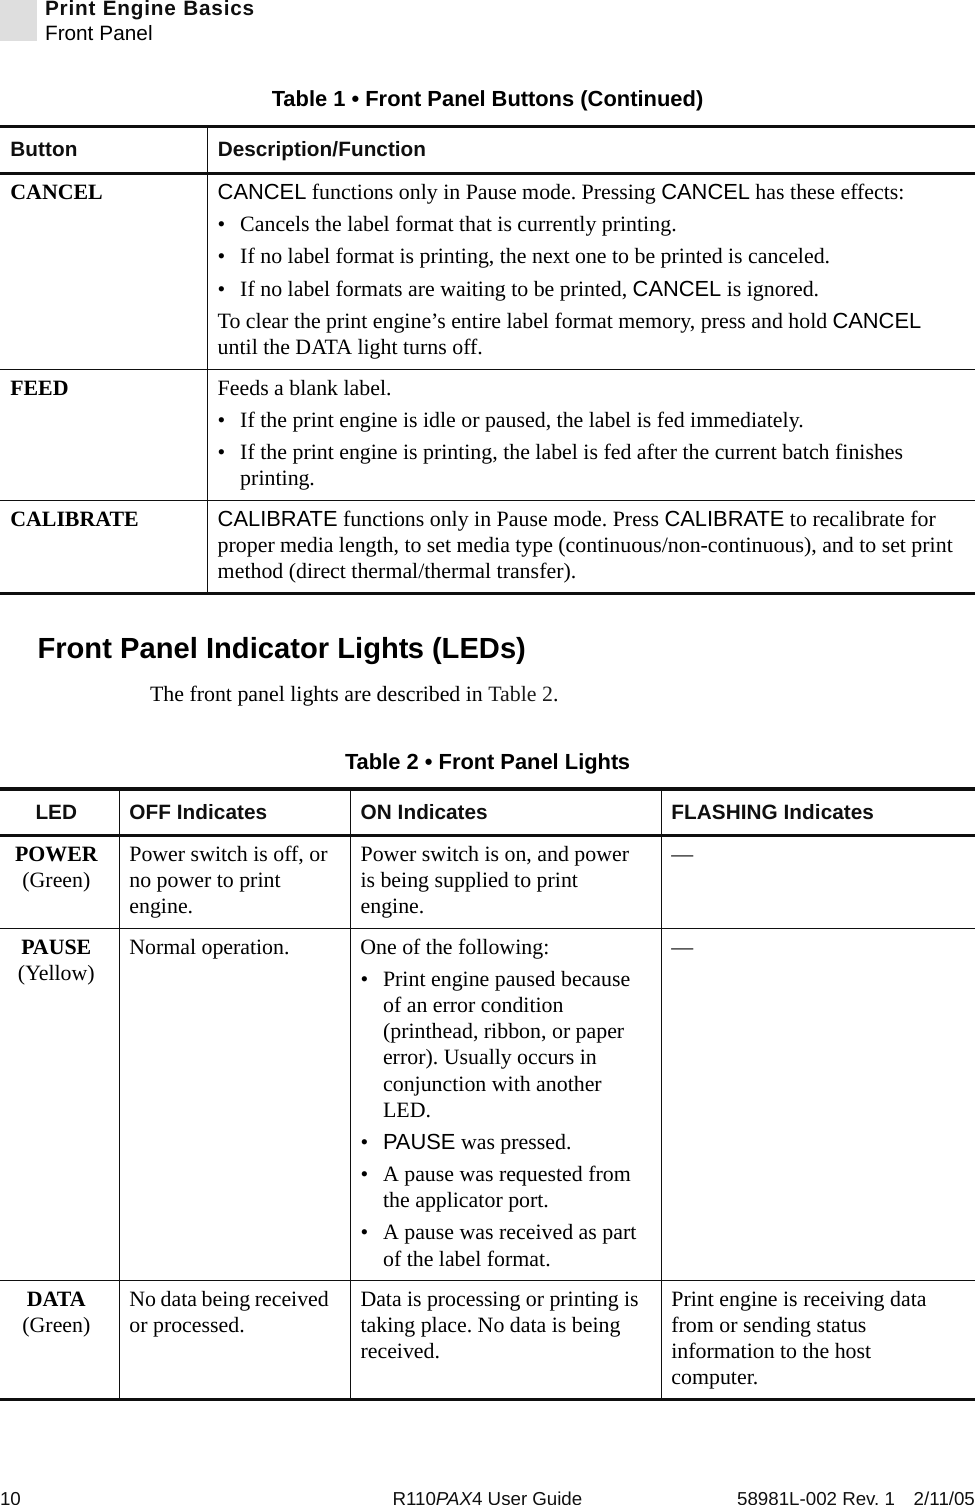 10 R110PAX4 User Guide 58981L-002 Rev. 1 2/11/05Print Engine BasicsFront PanelFront Panel Indicator Lights (LEDs)The front panel lights are described in Table 2.CANCEL CANCEL functions only in Pause mode. Pressing CANCEL has these effects:• Cancels the label format that is currently printing.• If no label format is printing, the next one to be printed is canceled.• If no label formats are waiting to be printed, CANCEL is ignored. To clear the print engine’s entire label format memory, press and hold CANCEL until the DATA light turns off.FEED Feeds a blank label. • If the print engine is idle or paused, the label is fed immediately. • If the print engine is printing, the label is fed after the current batch finishes printing.CALIBRATE CALIBRATE functions only in Pause mode. Press CALIBRATE to recalibrate for proper media length, to set media type (continuous/non-continuous), and to set print method (direct thermal/thermal transfer).Table 1 • Front Panel Buttons (Continued)Button Description/FunctionTable 2 • Front Panel LightsLED OFF Indicates ON Indicates FLASHING IndicatesPOWER(Green) Power switch is off, or no power to print engine.Power switch is on, and power is being supplied to print engine.—PAUSE(Yellow) Normal operation. One of the following:• Print engine paused because of an error condition (printhead, ribbon, or paper error). Usually occurs in conjunction with another LED.•PAUSE was pressed.• A pause was requested from the applicator port.• A pause was received as part of the label format.—DATA(Green) No data being received or processed. Data is processing or printing is taking place. No data is being received.Print engine is receiving data from or sending status information to the host computer.